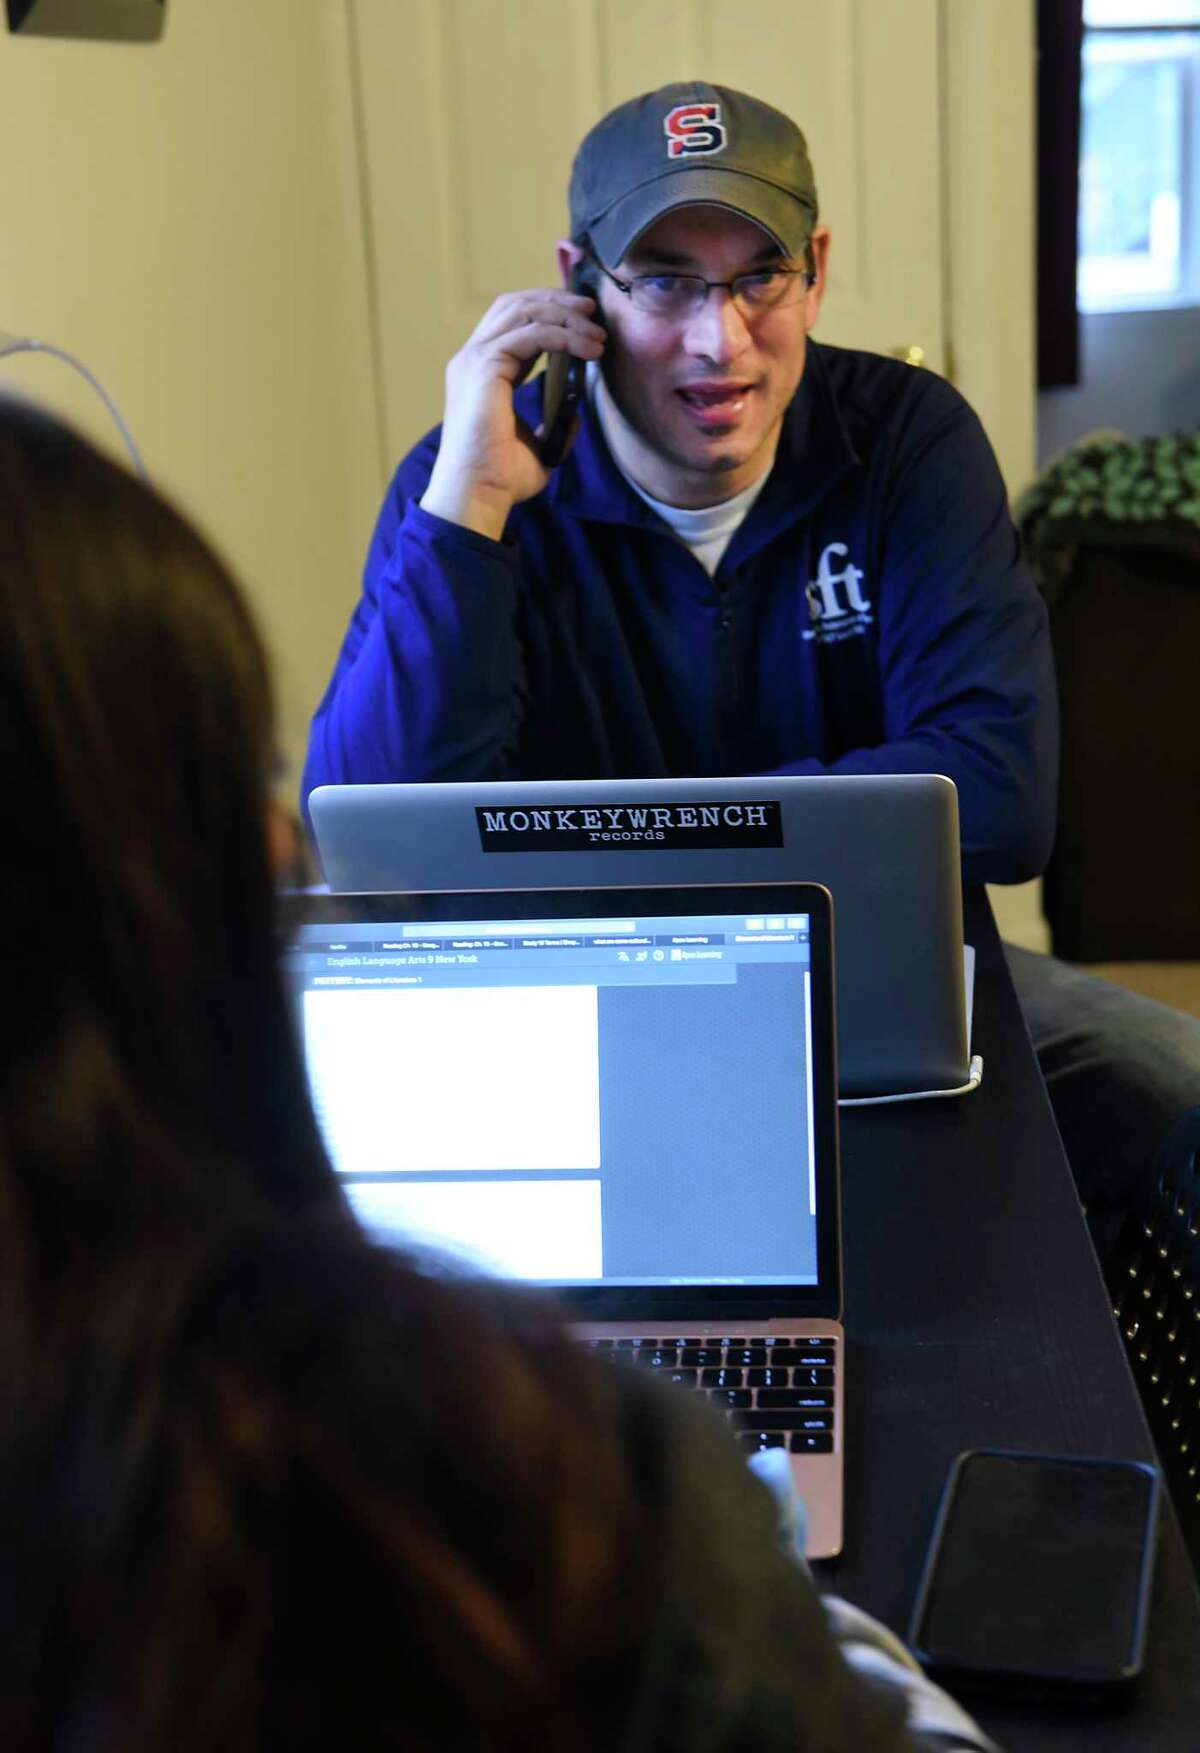 Schenectady High School U.S. history teacher Mike Silvestri calls his students who he sees are not logged on to Google classroom at his home on Friday, March 20, 2020 in Rensselaer, N.Y. Silvestri's 14-year-old daughter Zoe, a freshman at Albany High School, is seen working on a paper for school. (Lori Van Buren/Times Union)